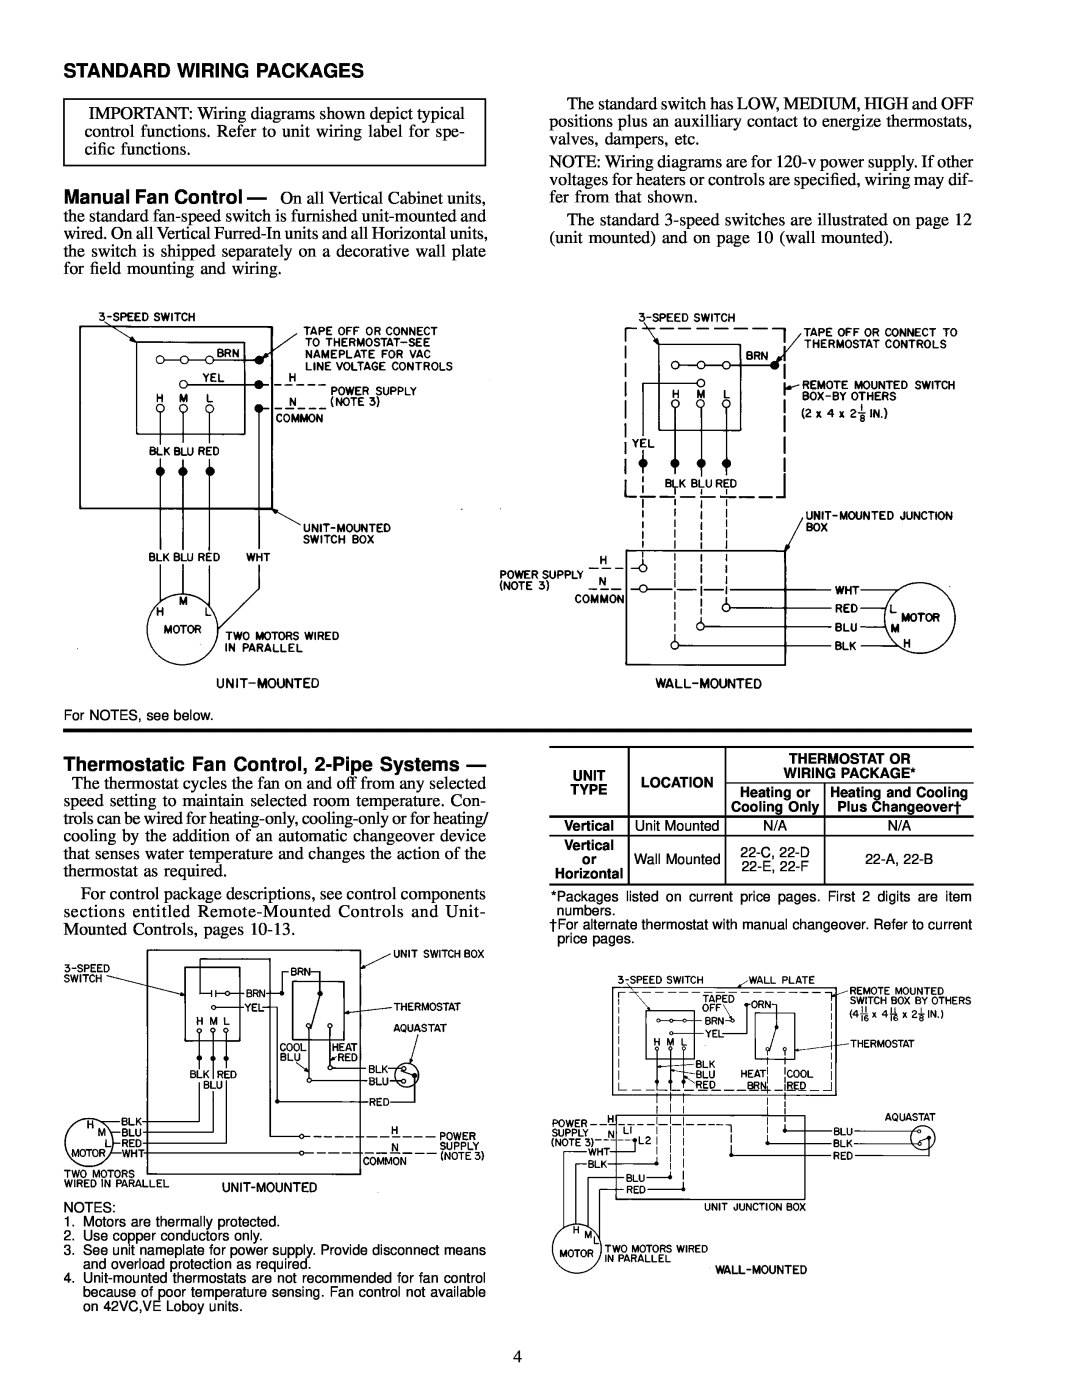 Carrier 42 SERIES specifications Standard Wiring Packages, Thermostatic Fan Control, 2-PipeSystems Ð 